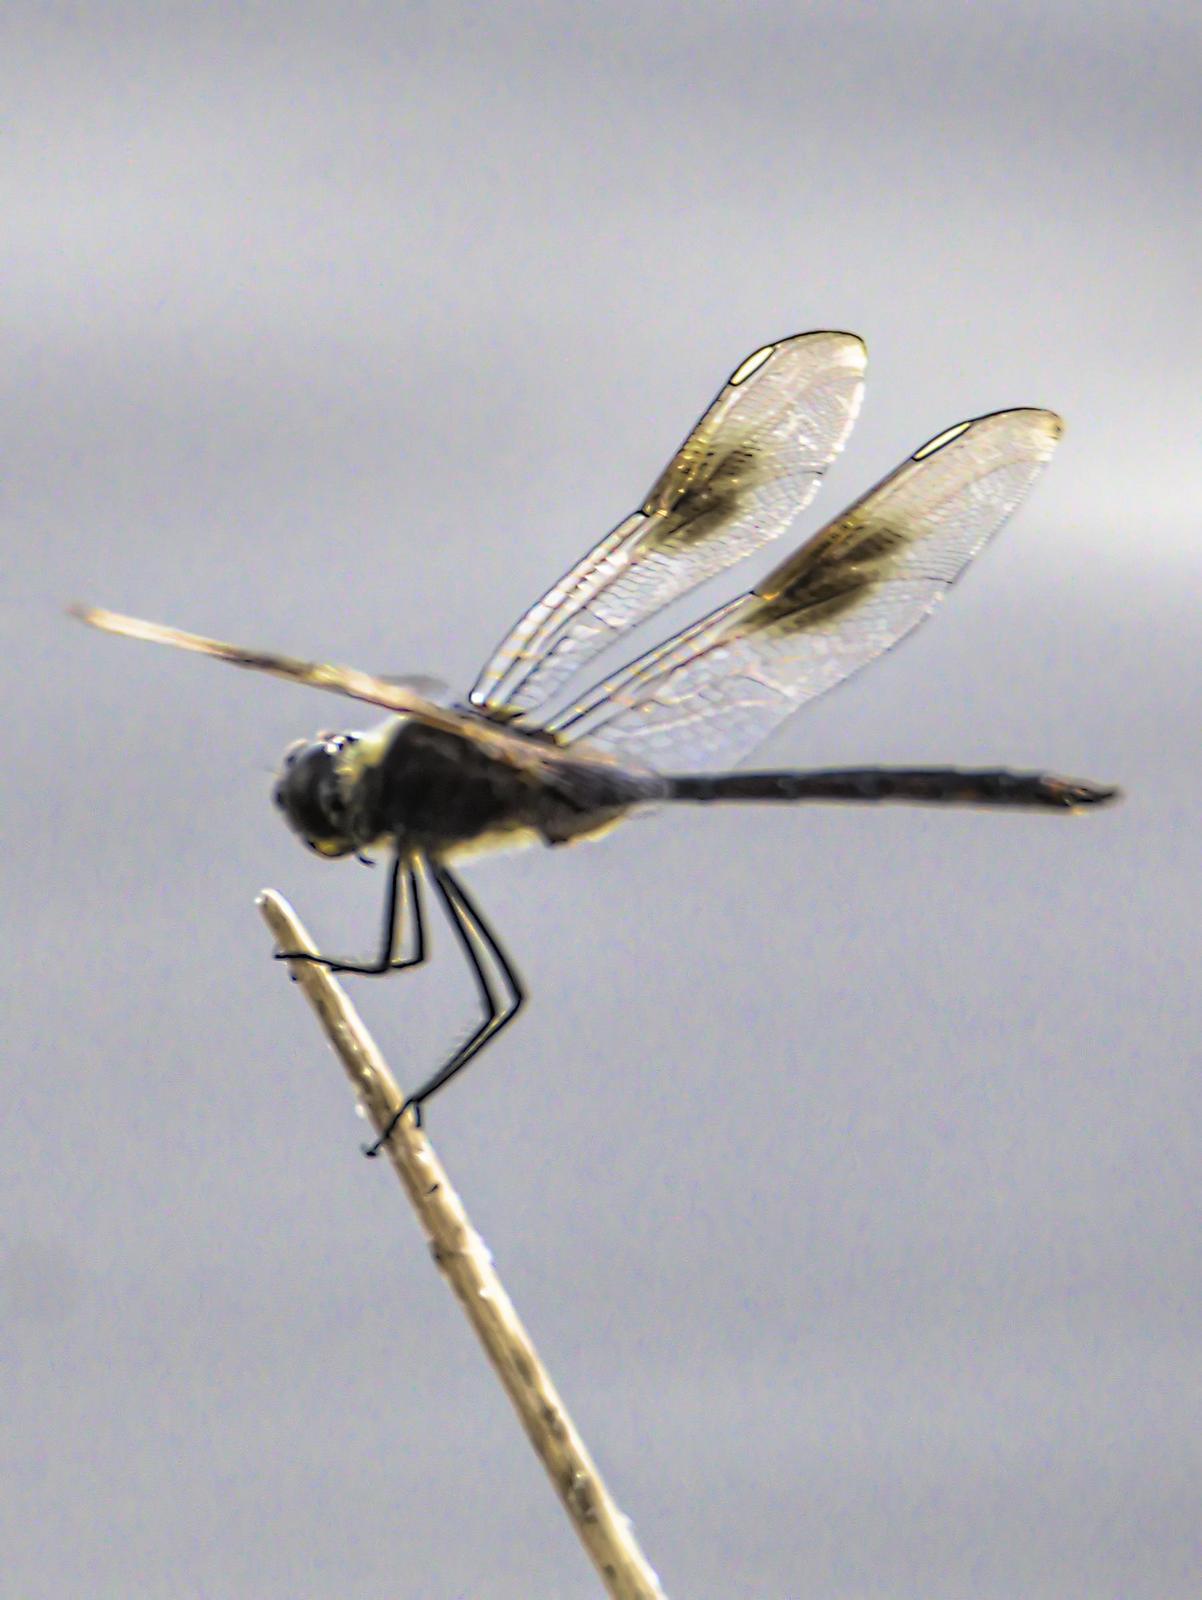 Four-spotted Pennant Photo by Dan Tallman